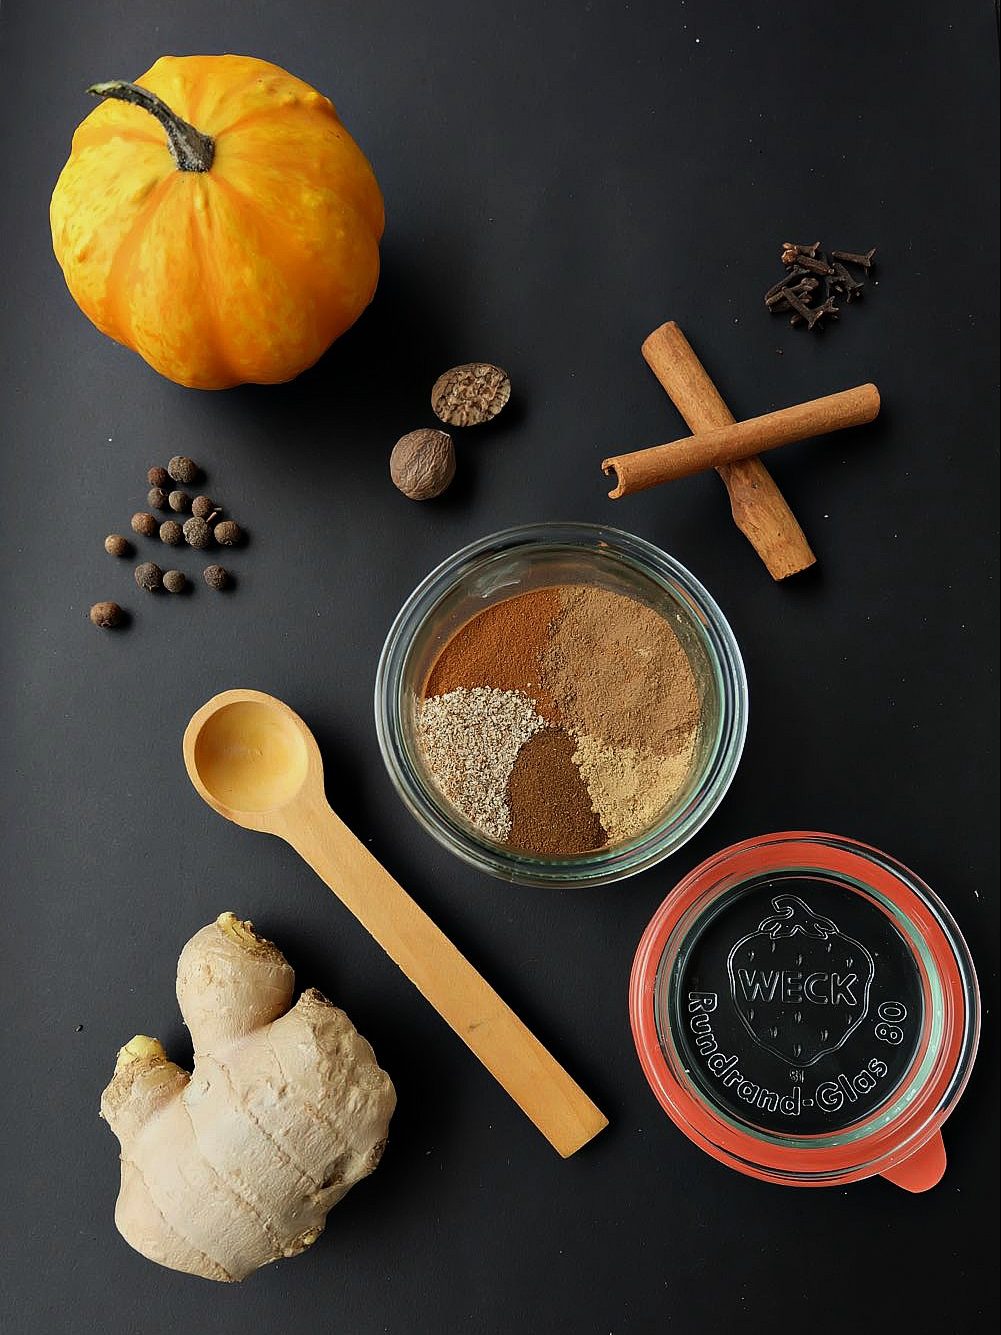 Make it from scratch! This DIY Pumpkin Spice Blend recipe is so easy to make homemade! Now you can pumpkin spice everything from pumpkin pie, to pumpkin spice lattes to all of your favorite foods and beverages! 